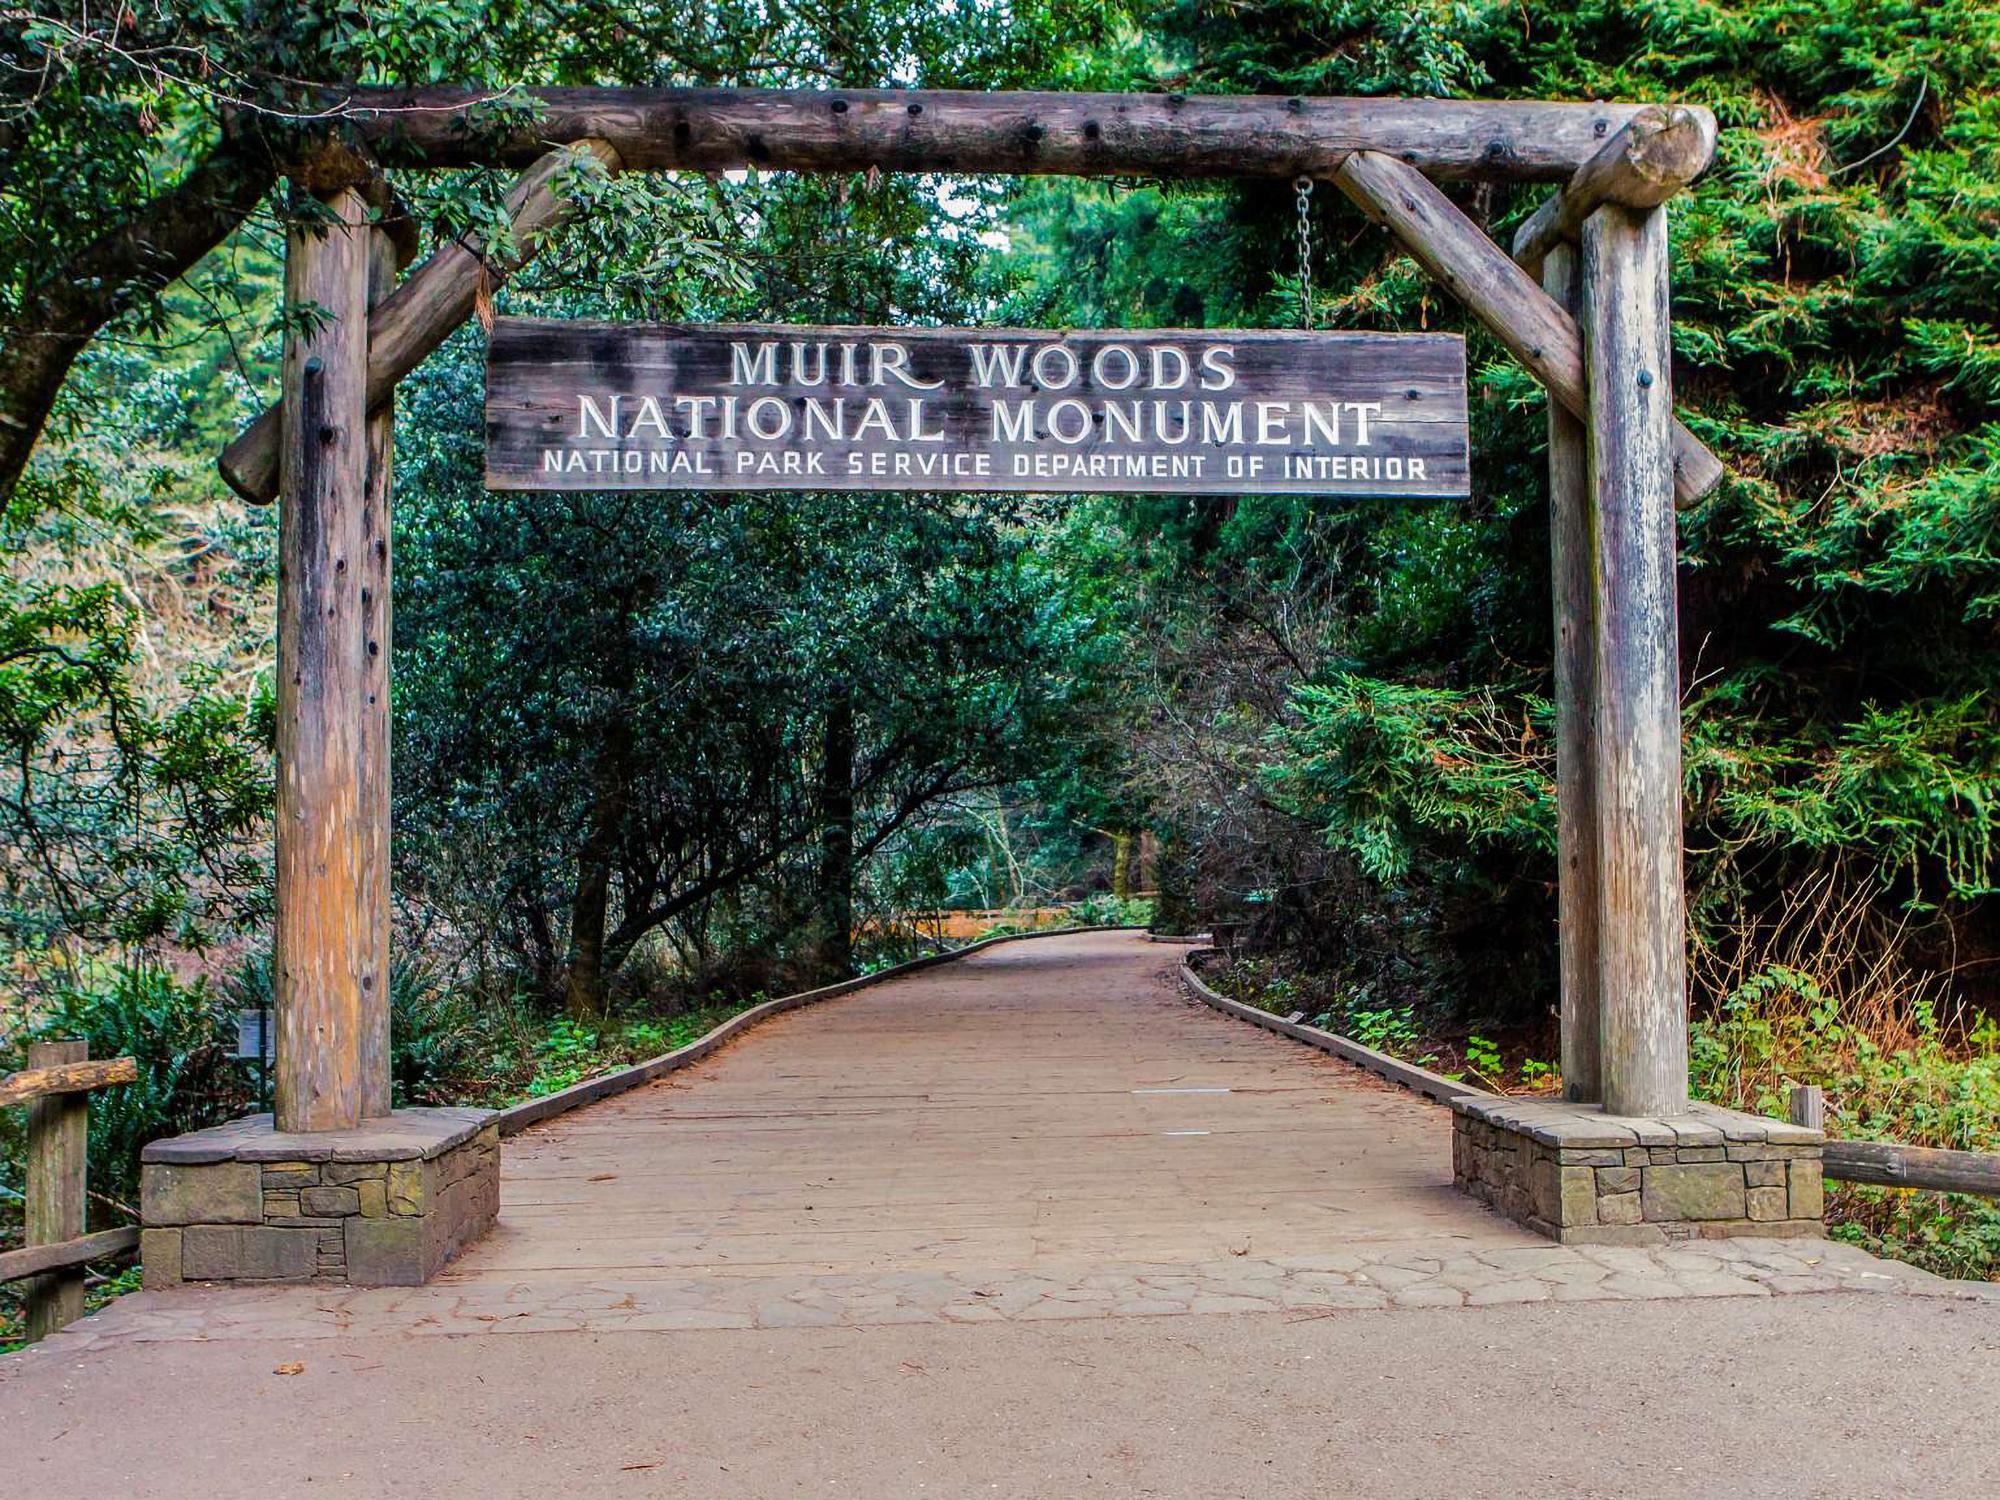 Wooden sign and entrance to Muir Woods National Monument